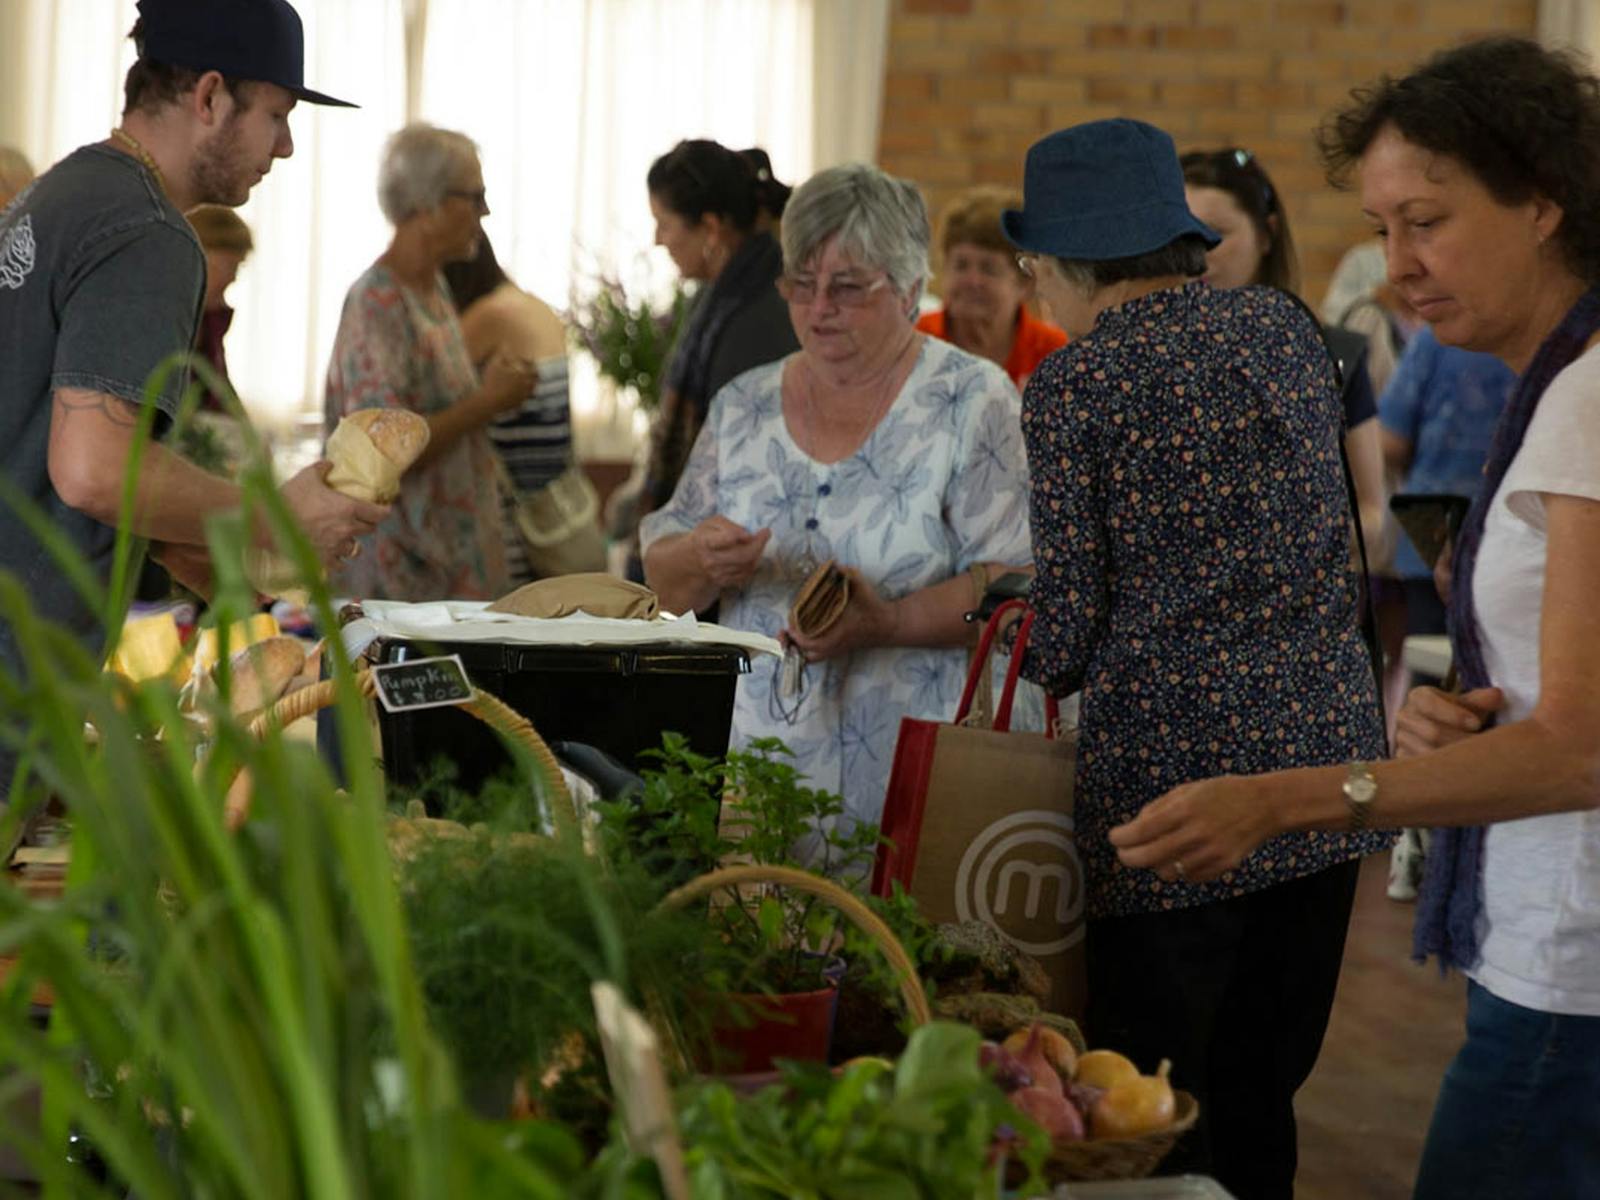 Local Produce available at the Tenterfield Farmers Markets